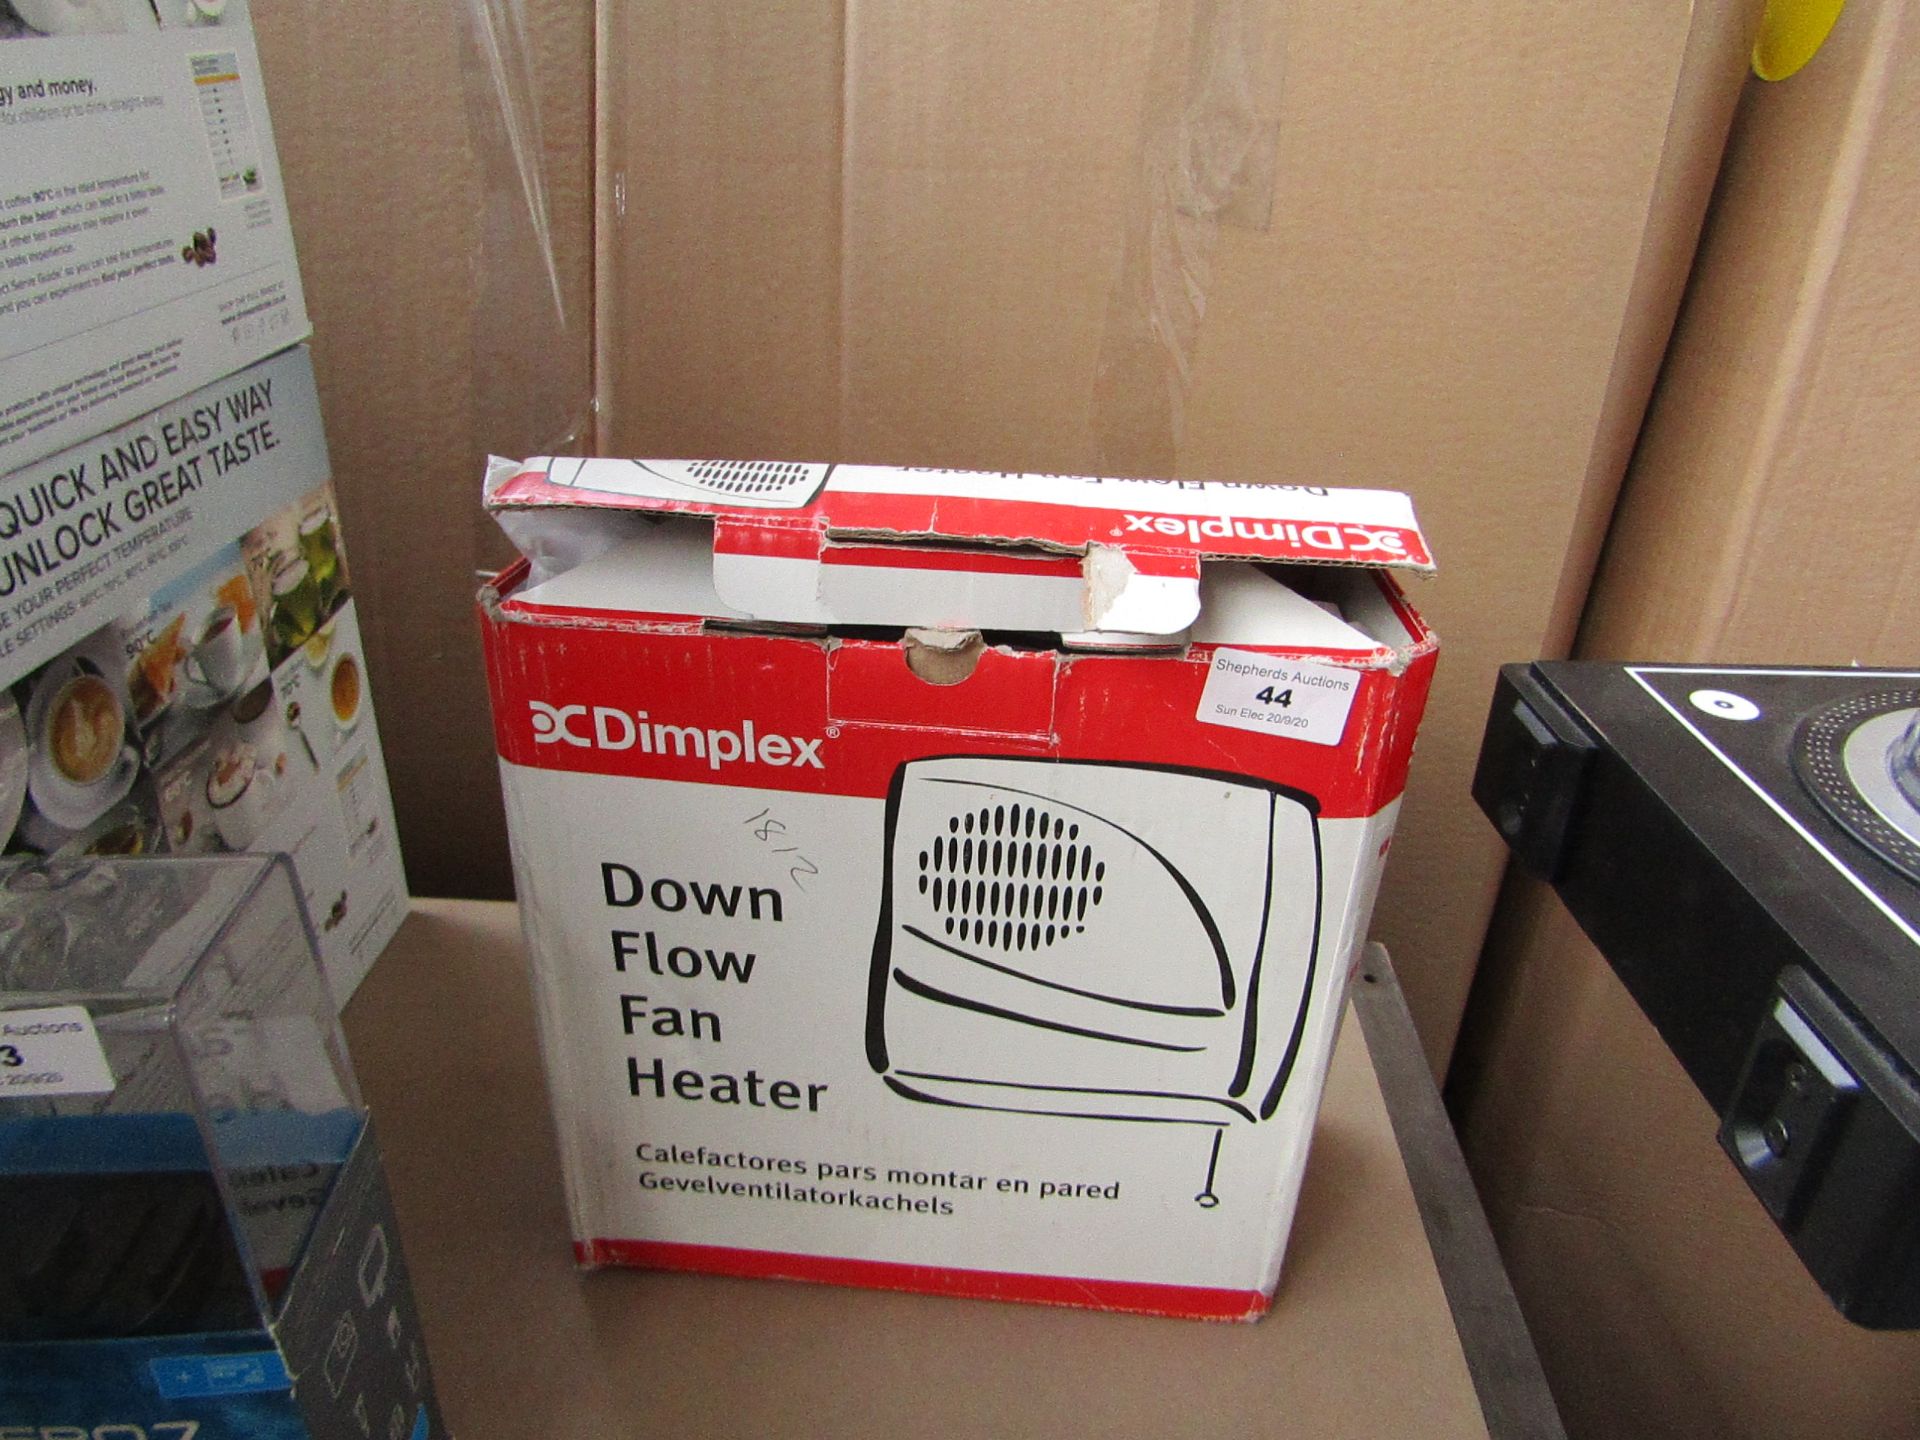 Dimplex down flow fan heater, unchecked and boxed.